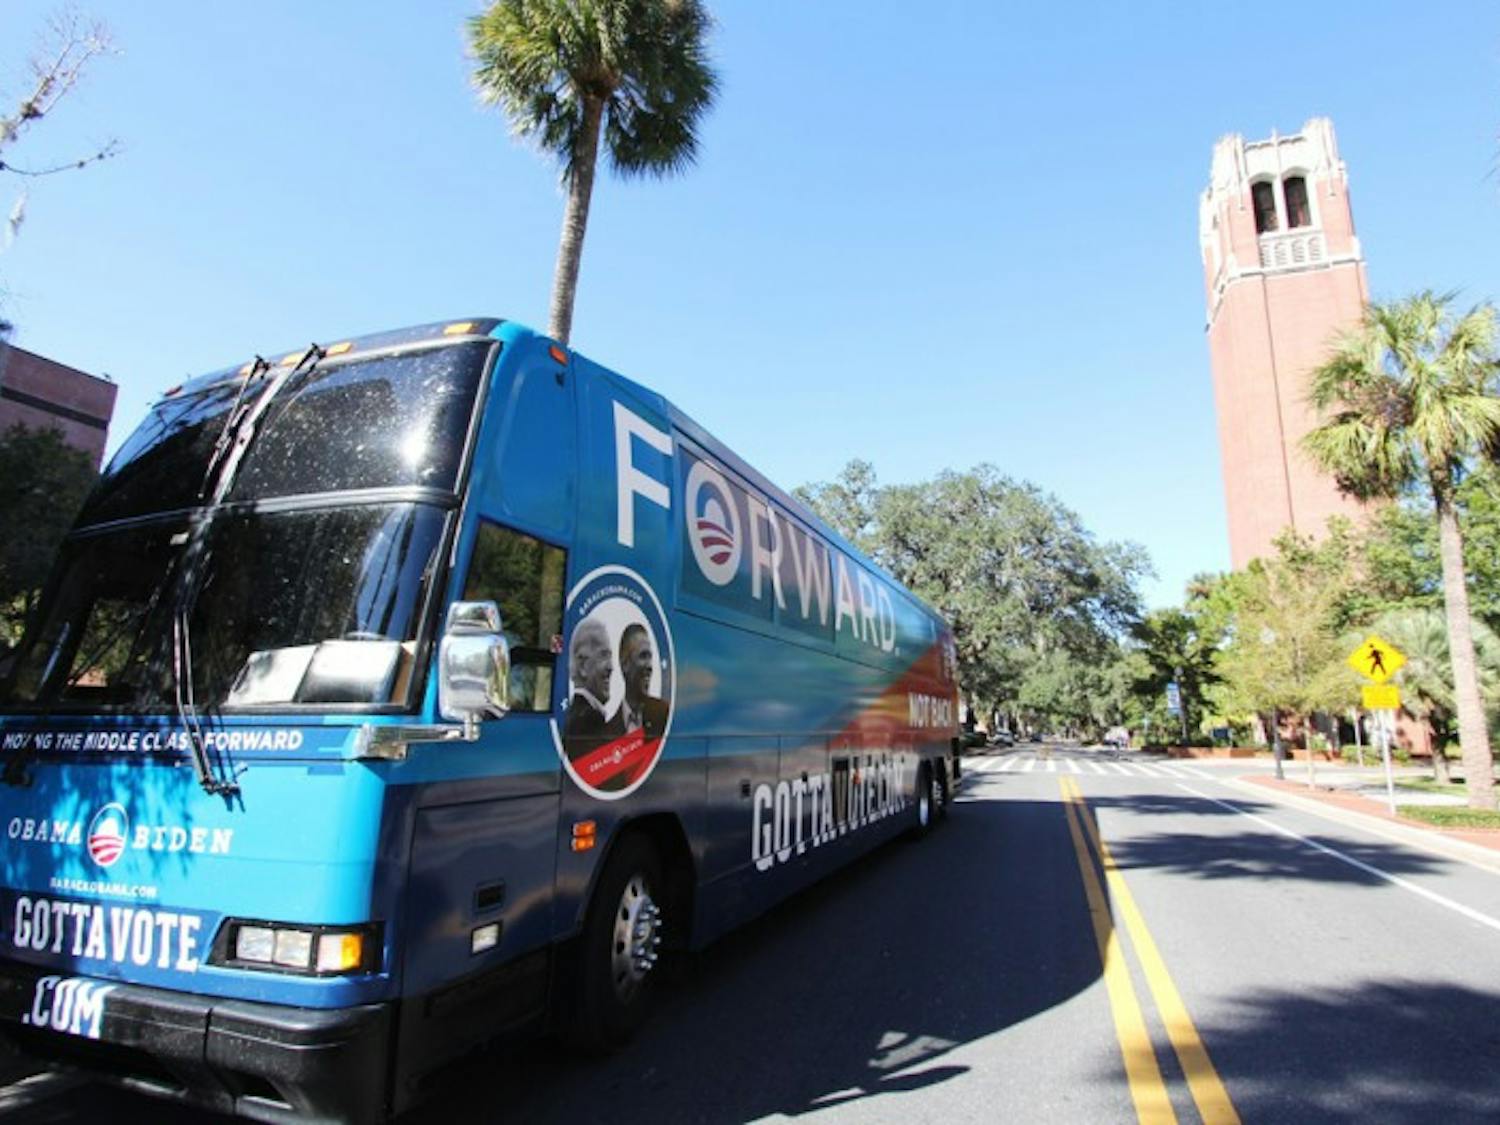 The Democratic National Committee bus sits outside of Turlington Hall on Sunday. Special guests including former Michigan governor Jennifer Granholm and model Chanel Iman spoke to students about voting. “I’m here to urge Florida to vote,” Granholm said, “because the whole country is watching and everything you are doing is so significant to the rest of us.”